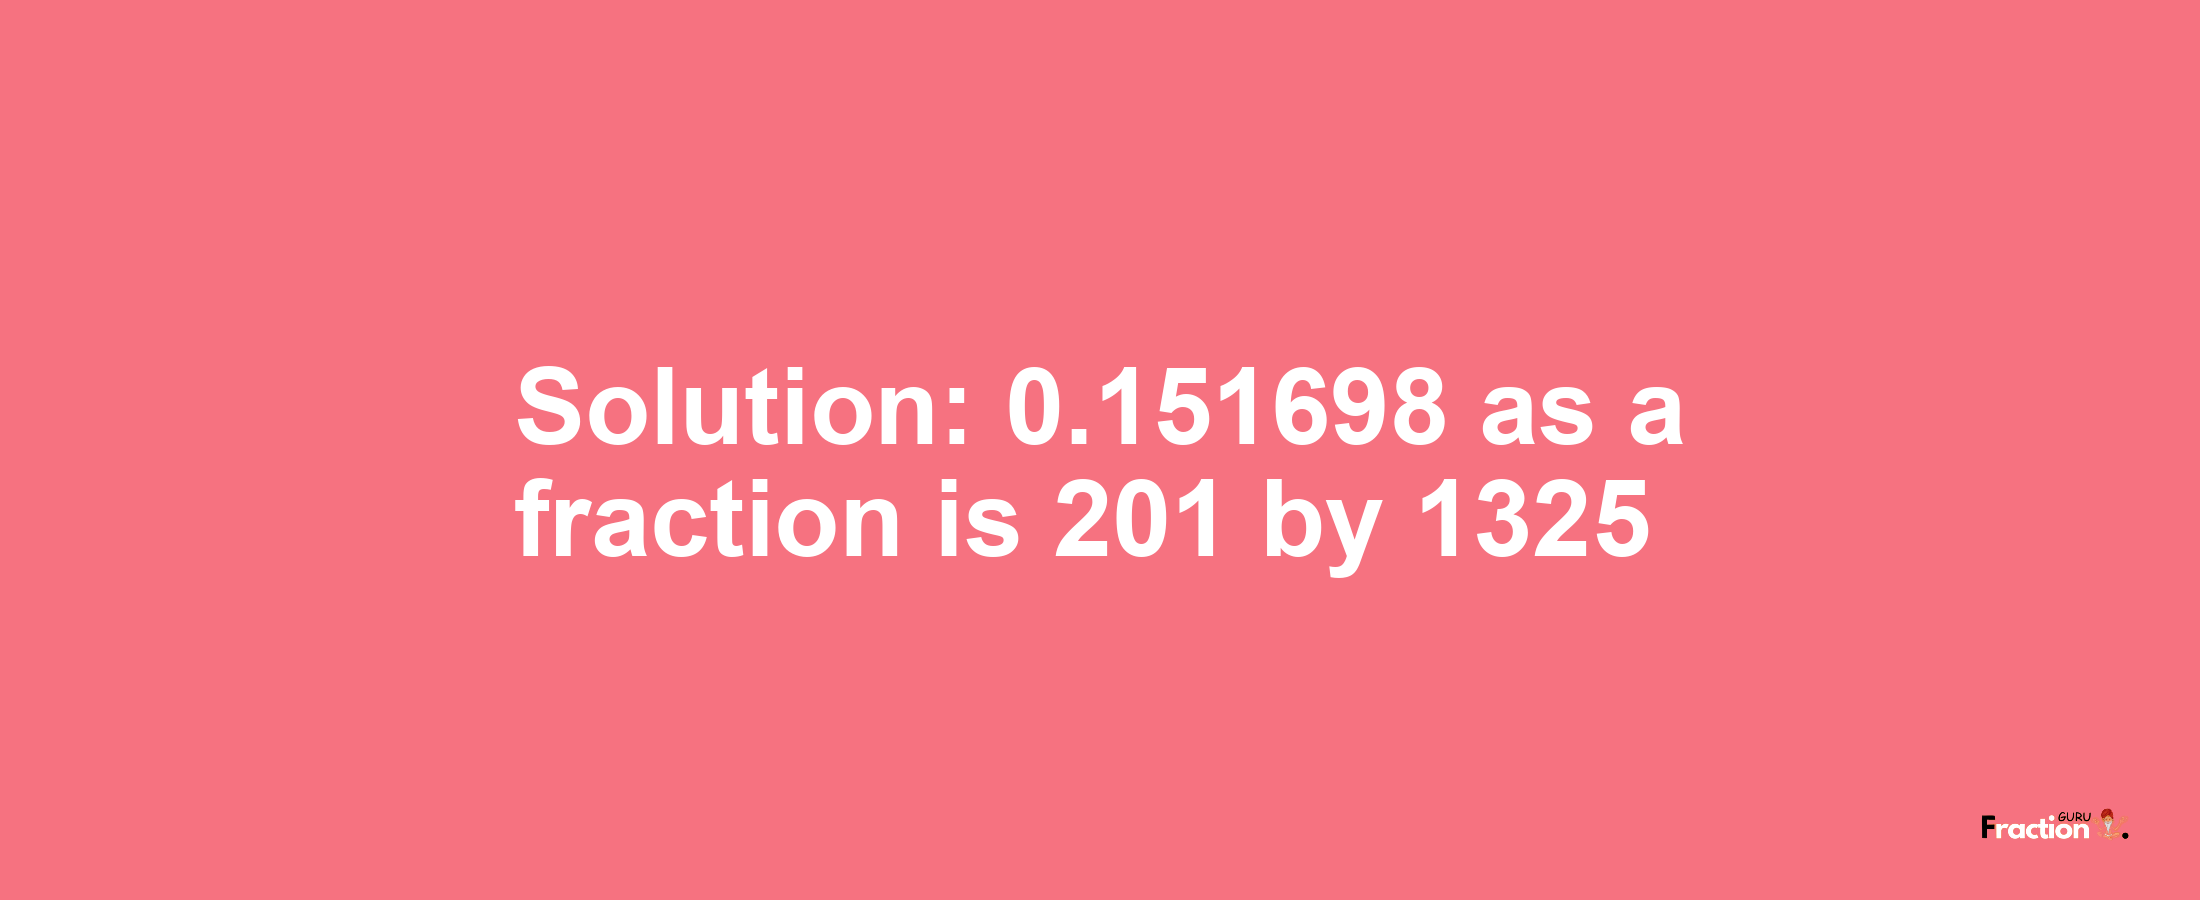 Solution:0.151698 as a fraction is 201/1325